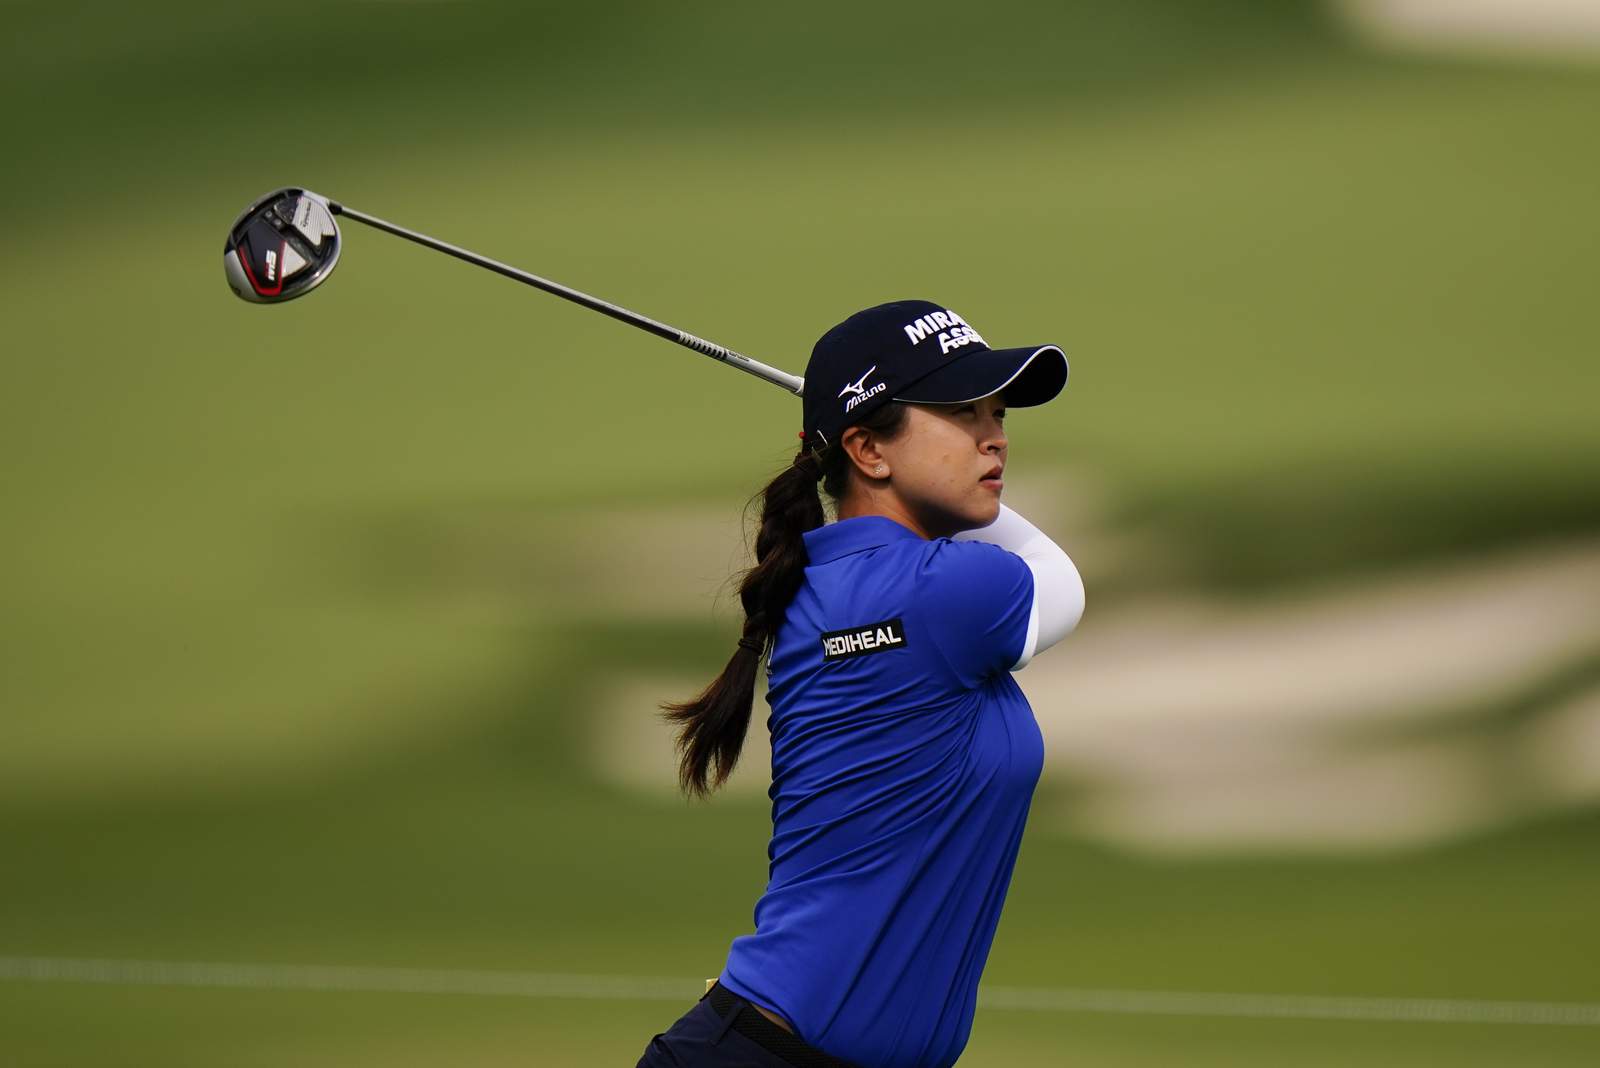 Sei Young Kim up by 2 shots after 3 rounds at Women's PGA